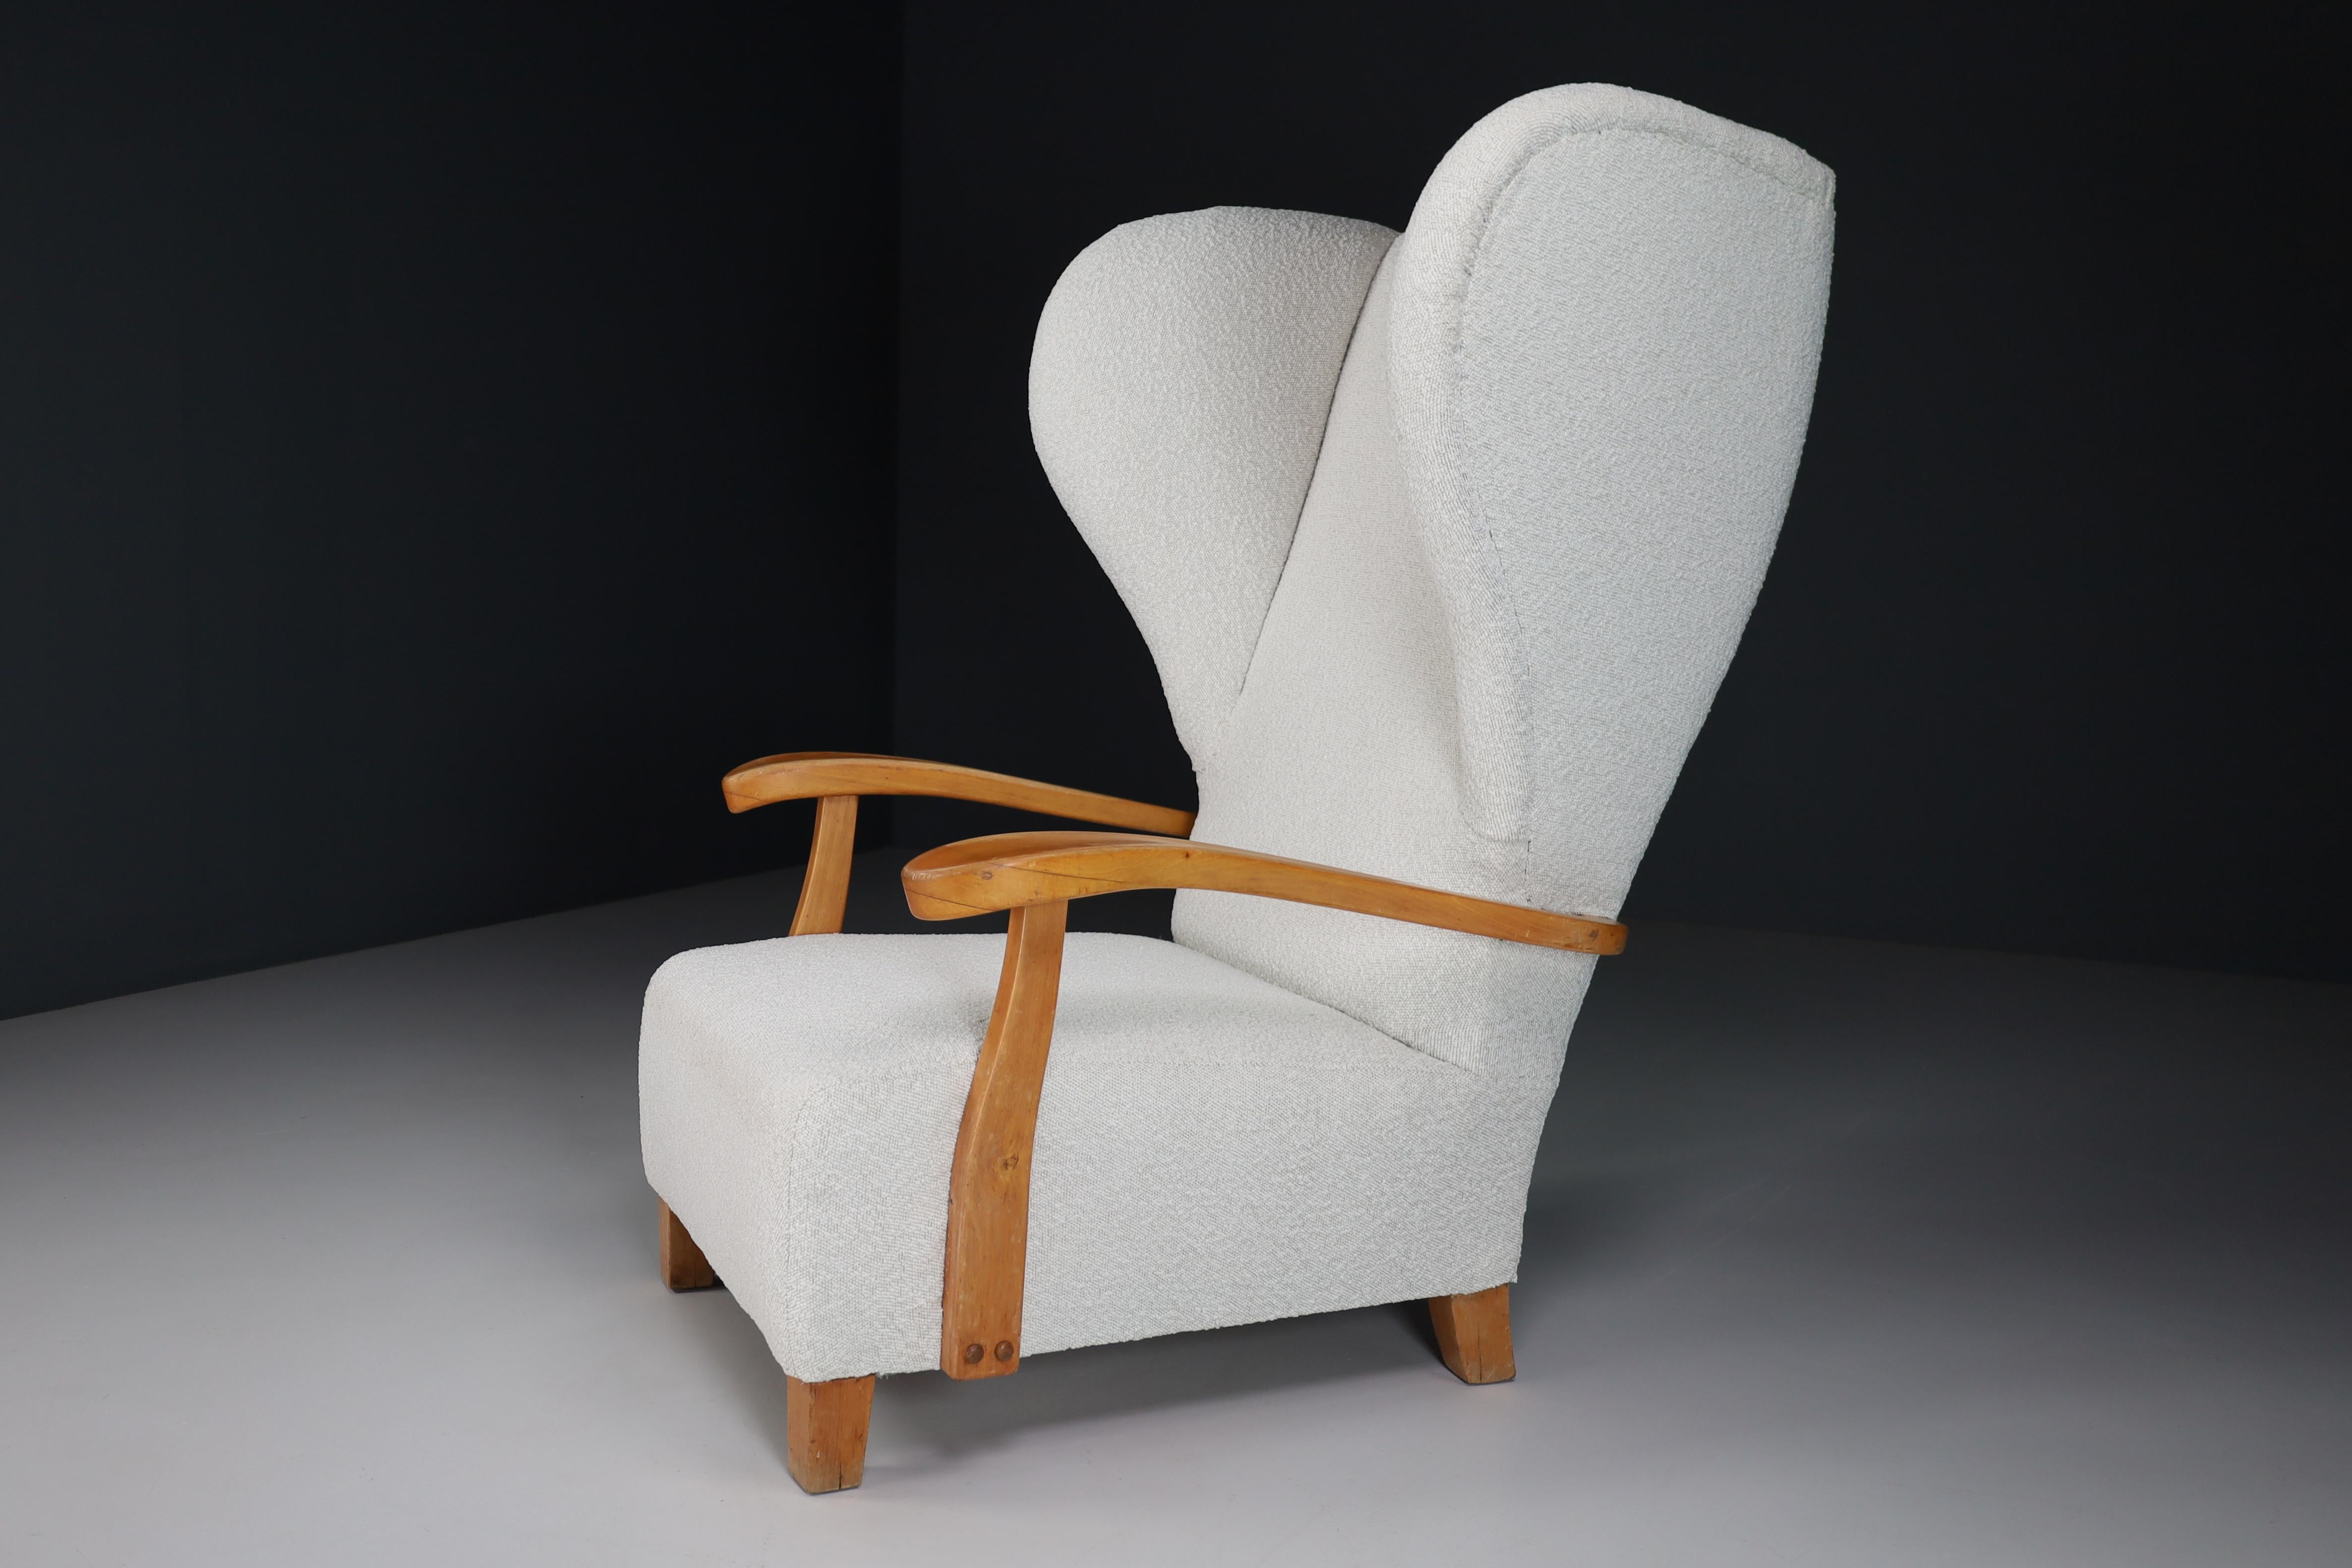 XXL Monumental Wingback Armchair in Walnut and Bouclé Fabric, France 1930s For Sale 3